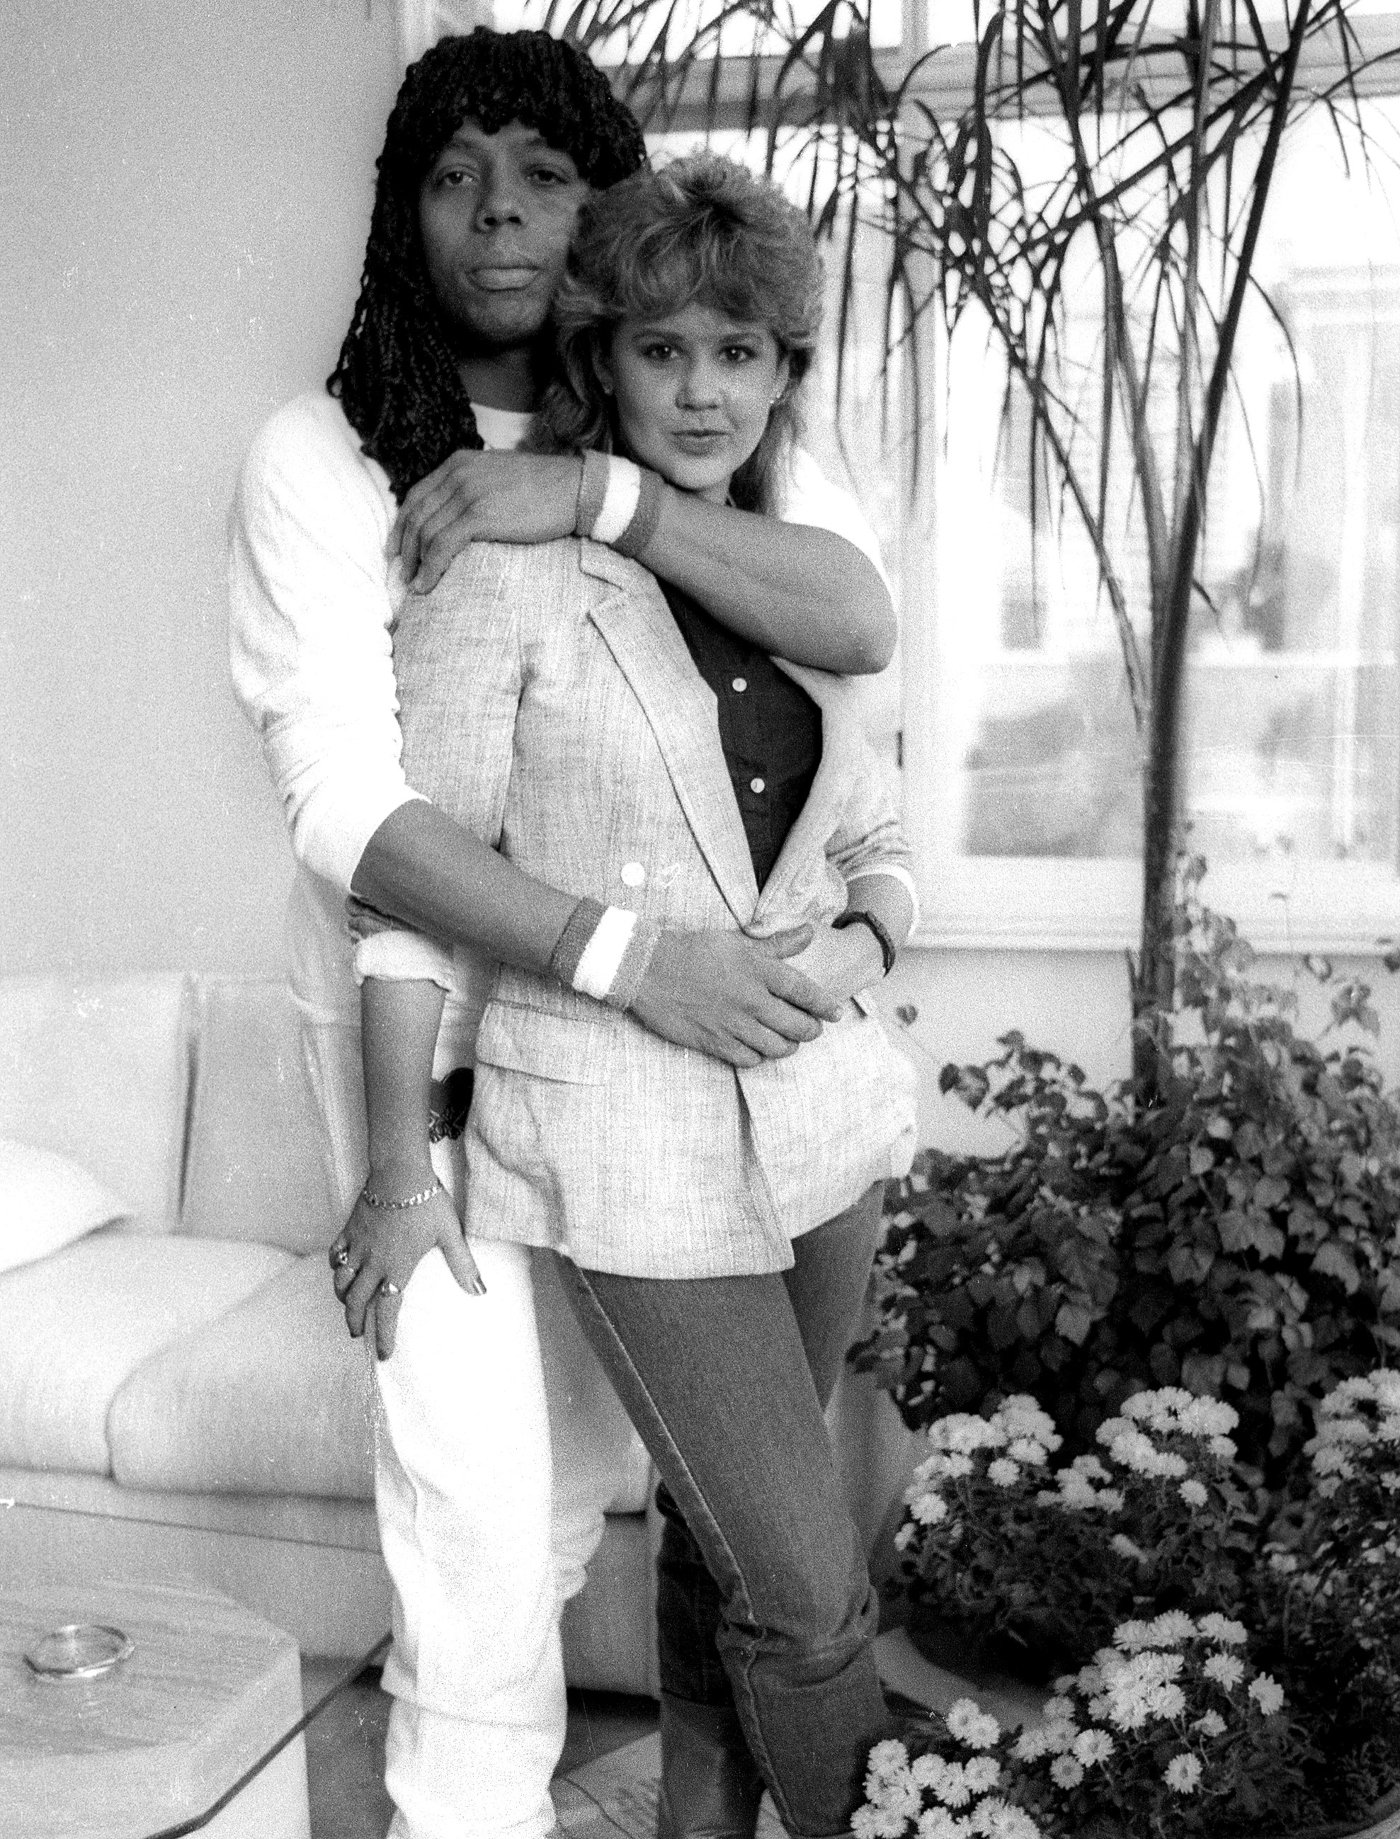 Rick James and Linda Blair pose for a newspaper photograph in 1982